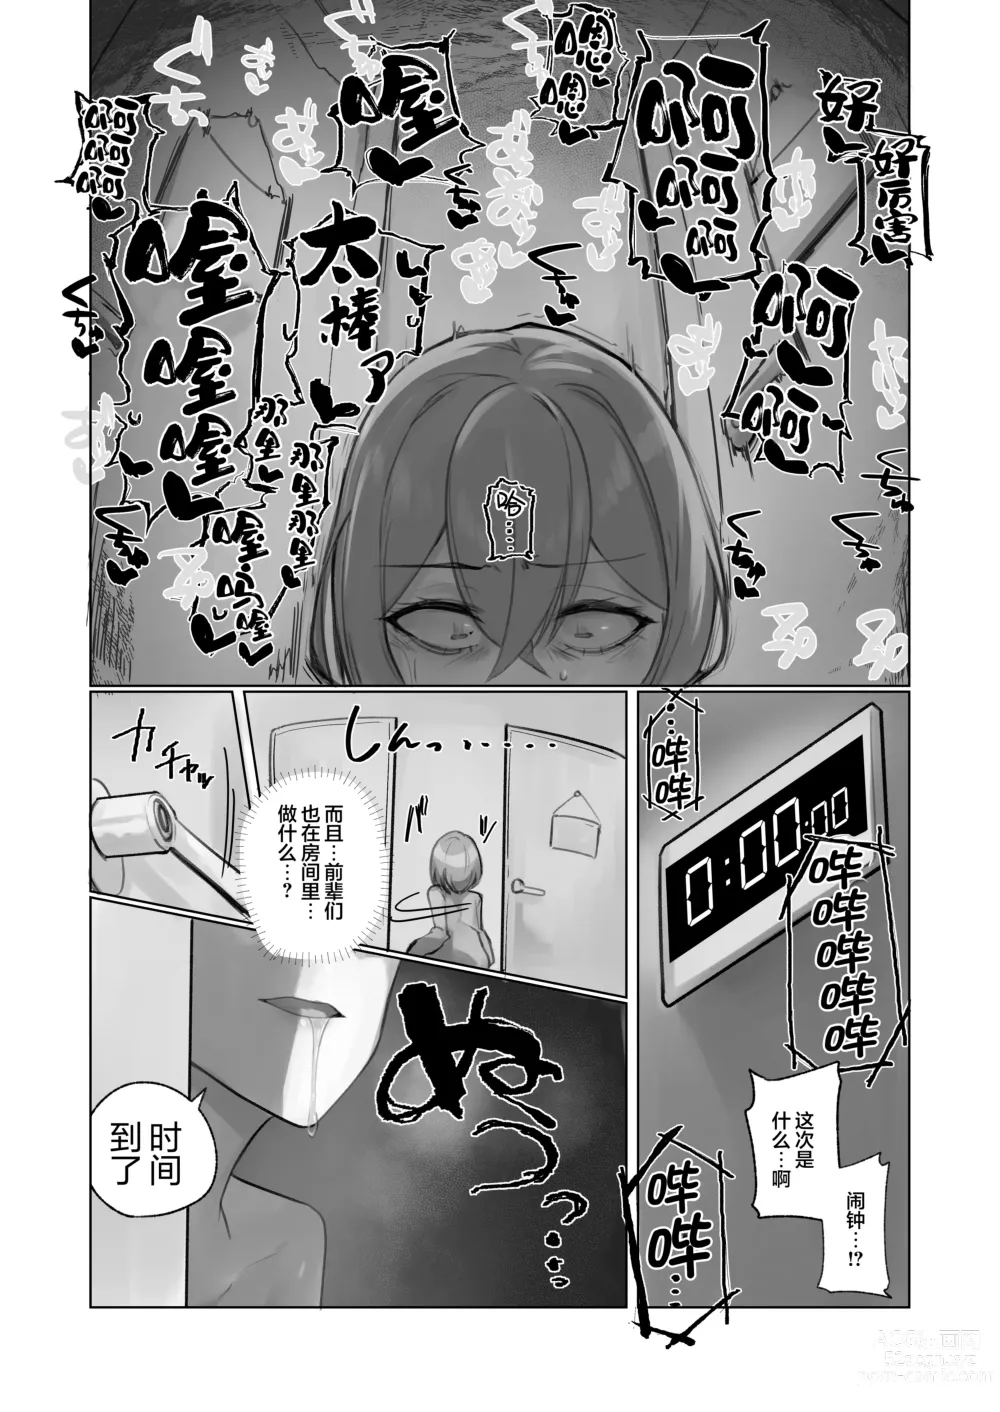 Page 6 of doujinshi Youkoso  Share House e